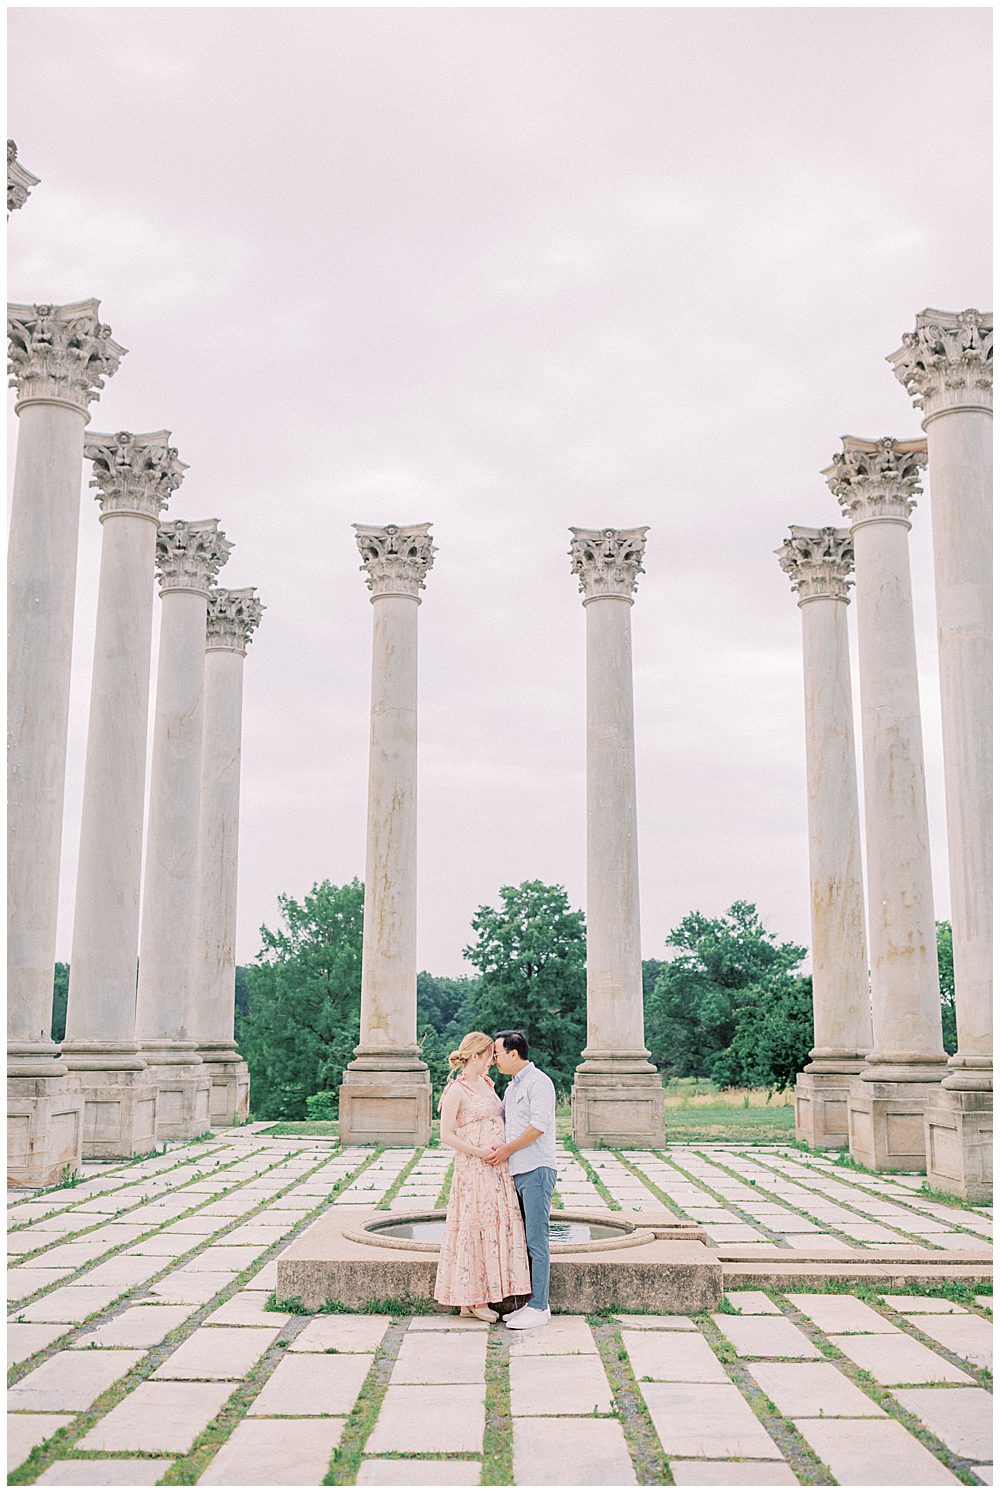 Mother and father stand in the middle of the columns at the National Arboretum facing one another during their maternity session.